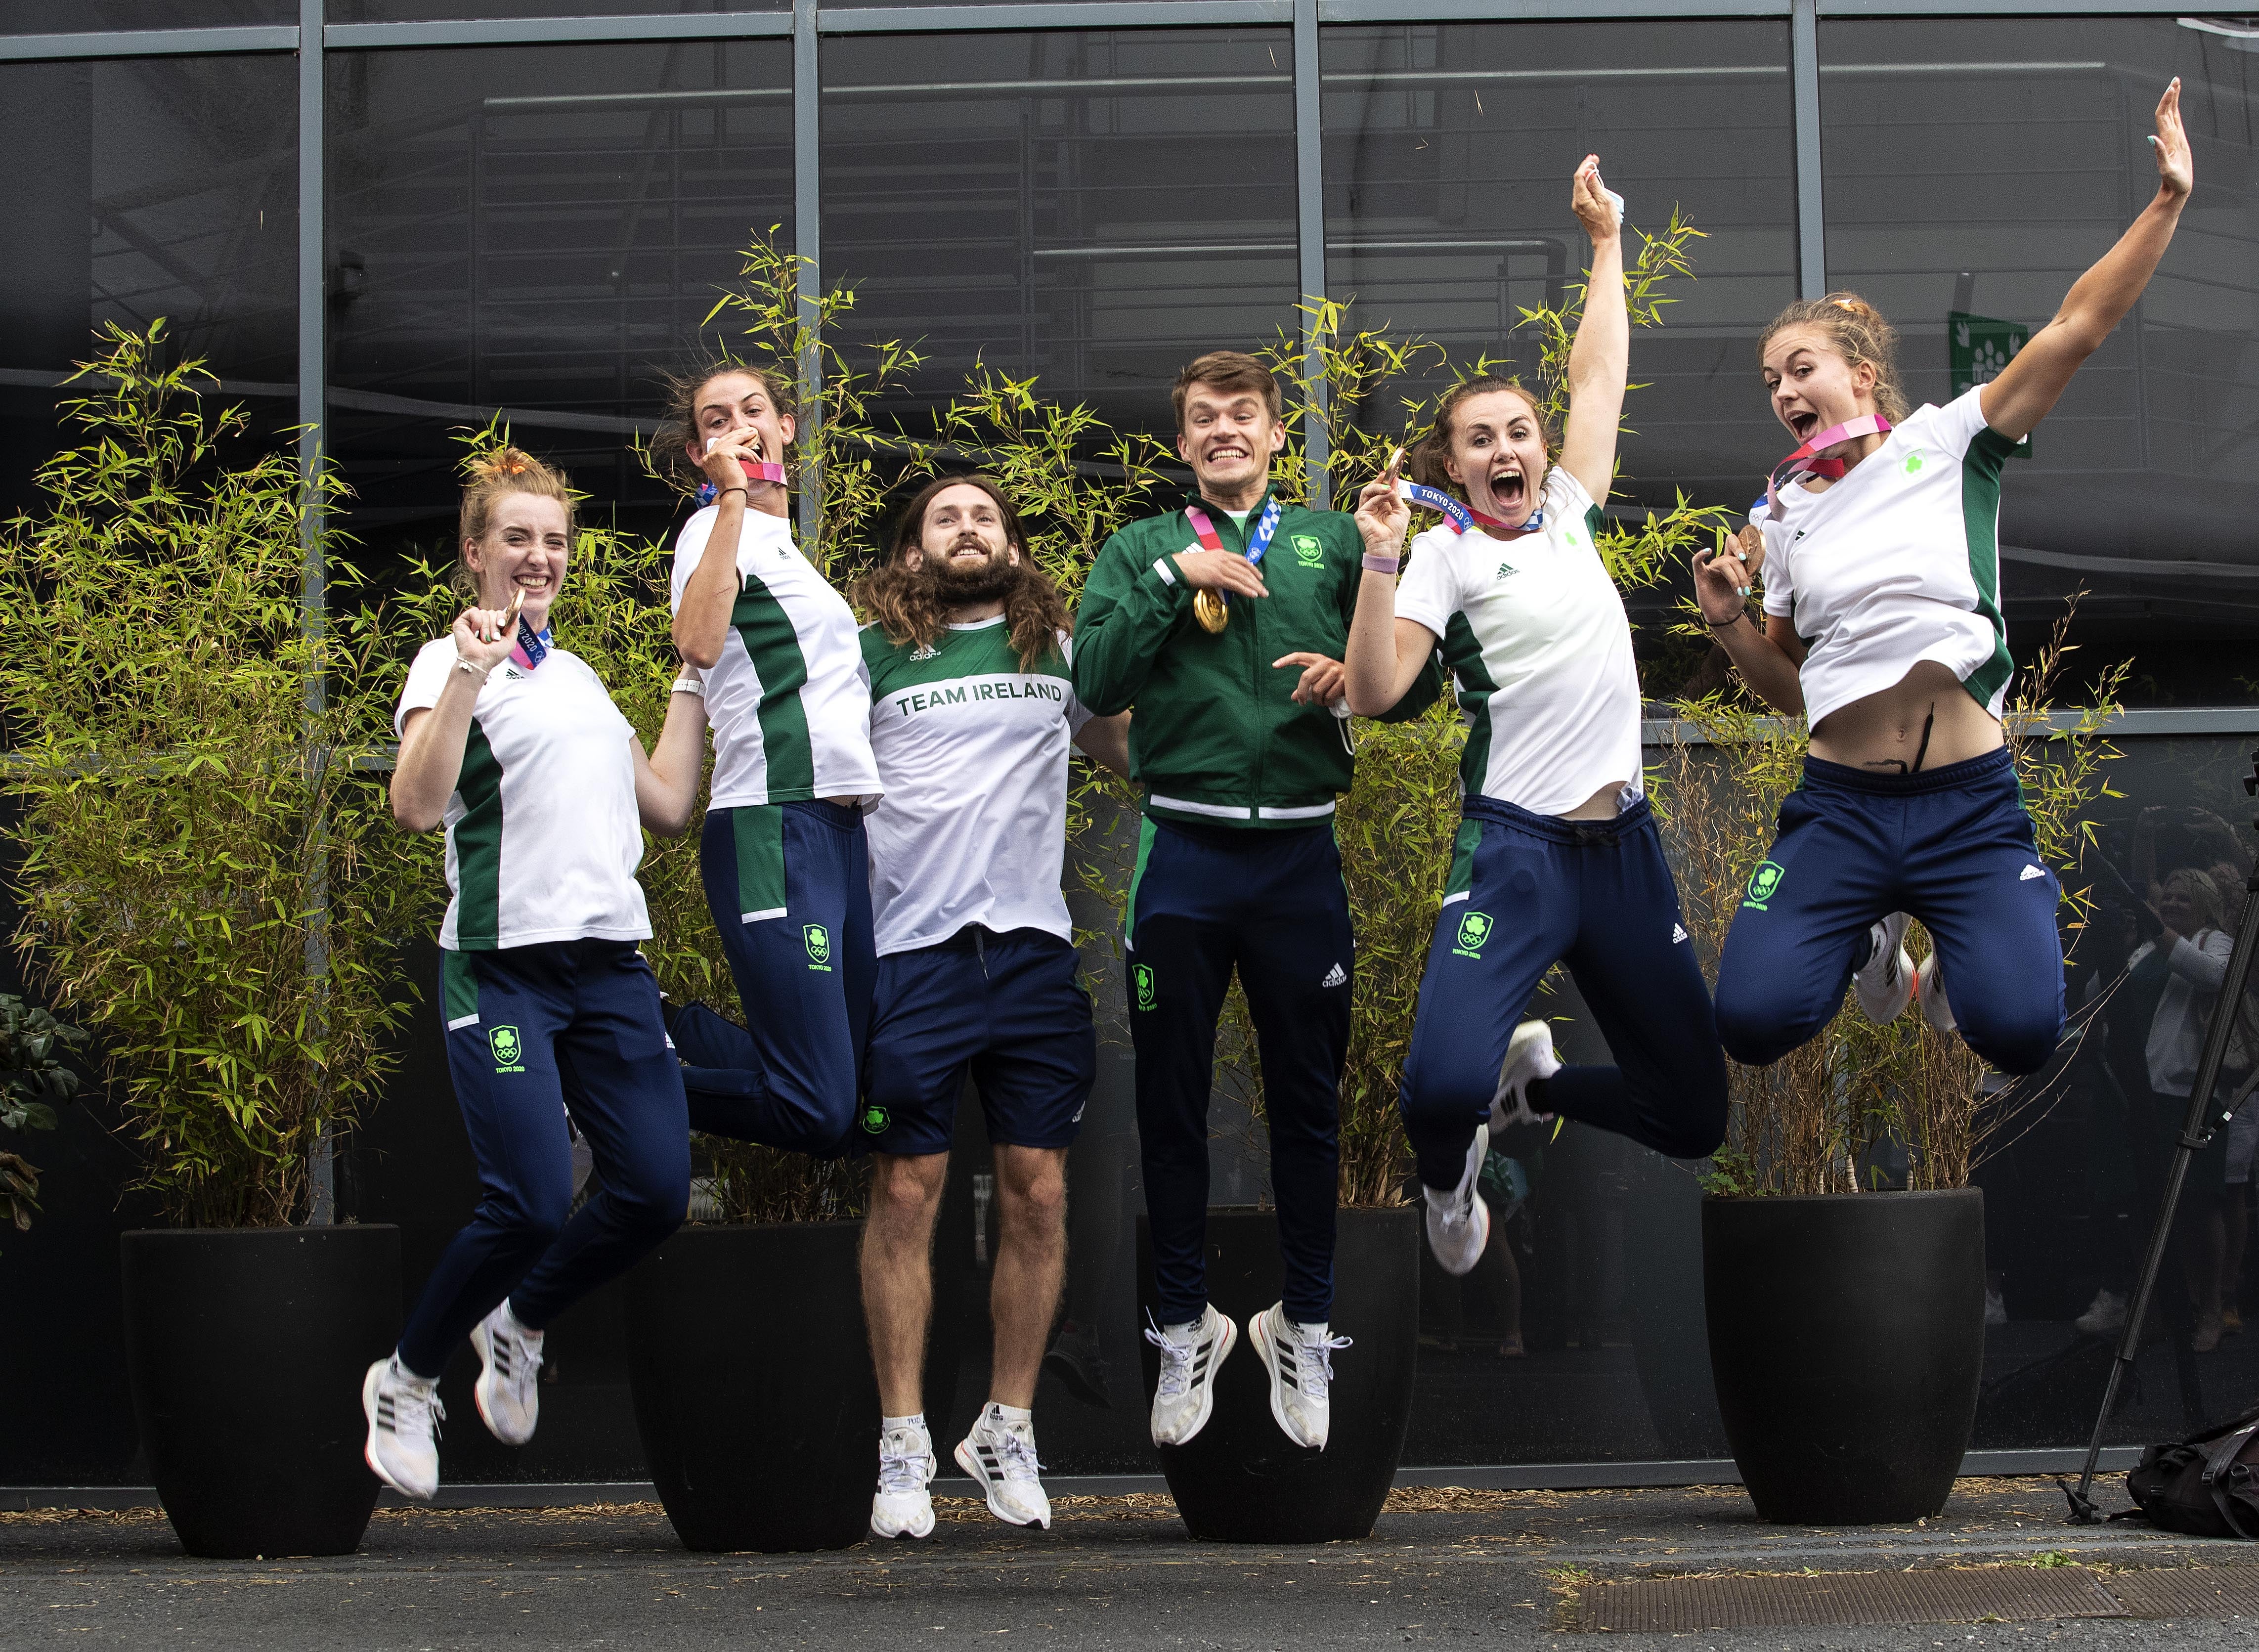 Irish rowers with their gold and bronze medals, left to right, Emily Hegarty, Fiona Murtagh, Paul O’Donovan, Fintan McCarthy, Aifric Keogh and Eimear Lambe, at Dublin Airport following their return from the Olympics (Damien Eagers/PA)